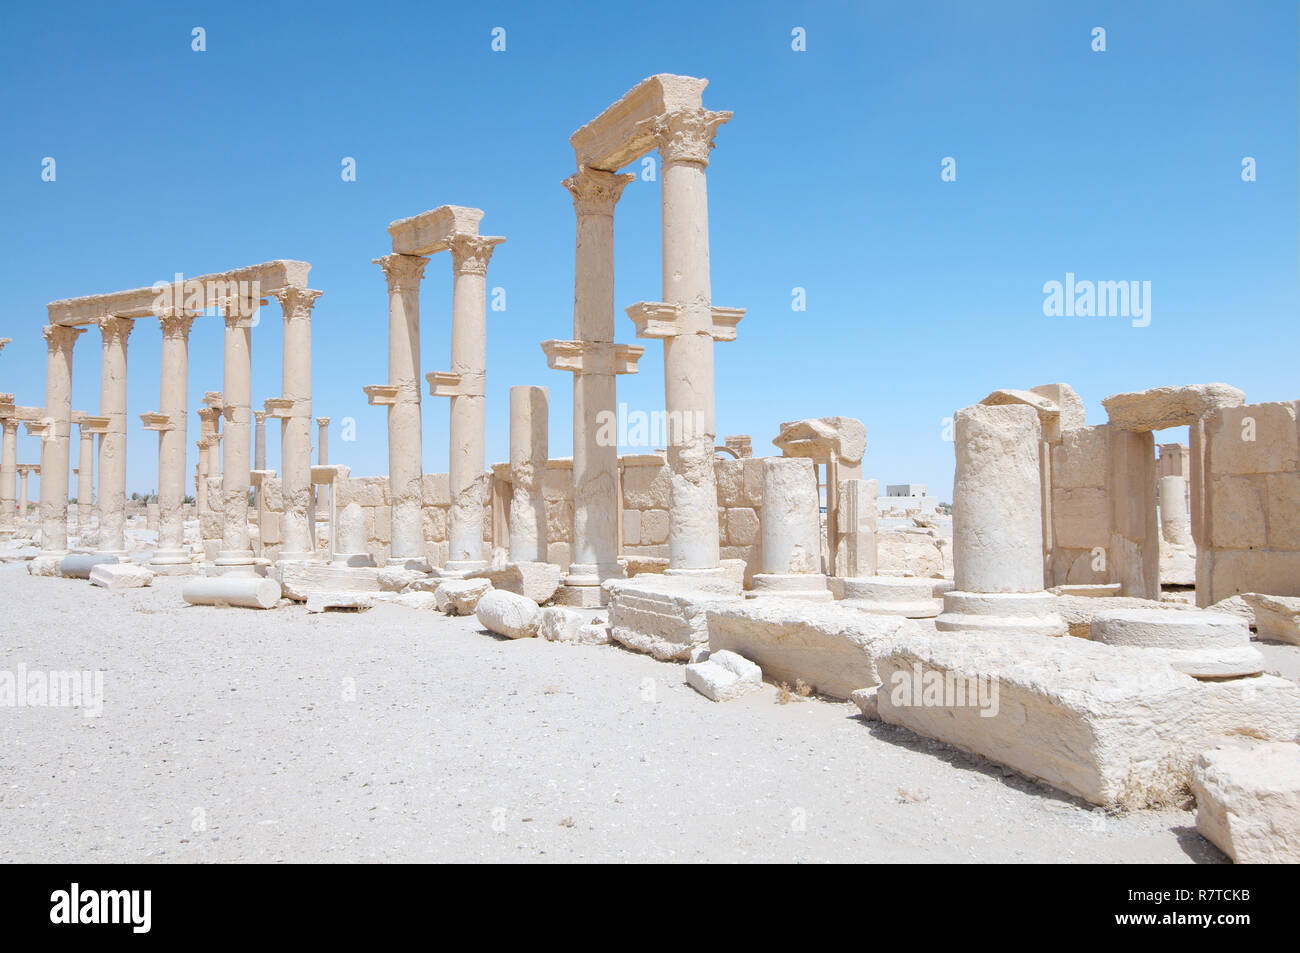 Ruins of the ancient city of Palmyra, Palmyra District, Homs Governorate, Syria Stock Photo